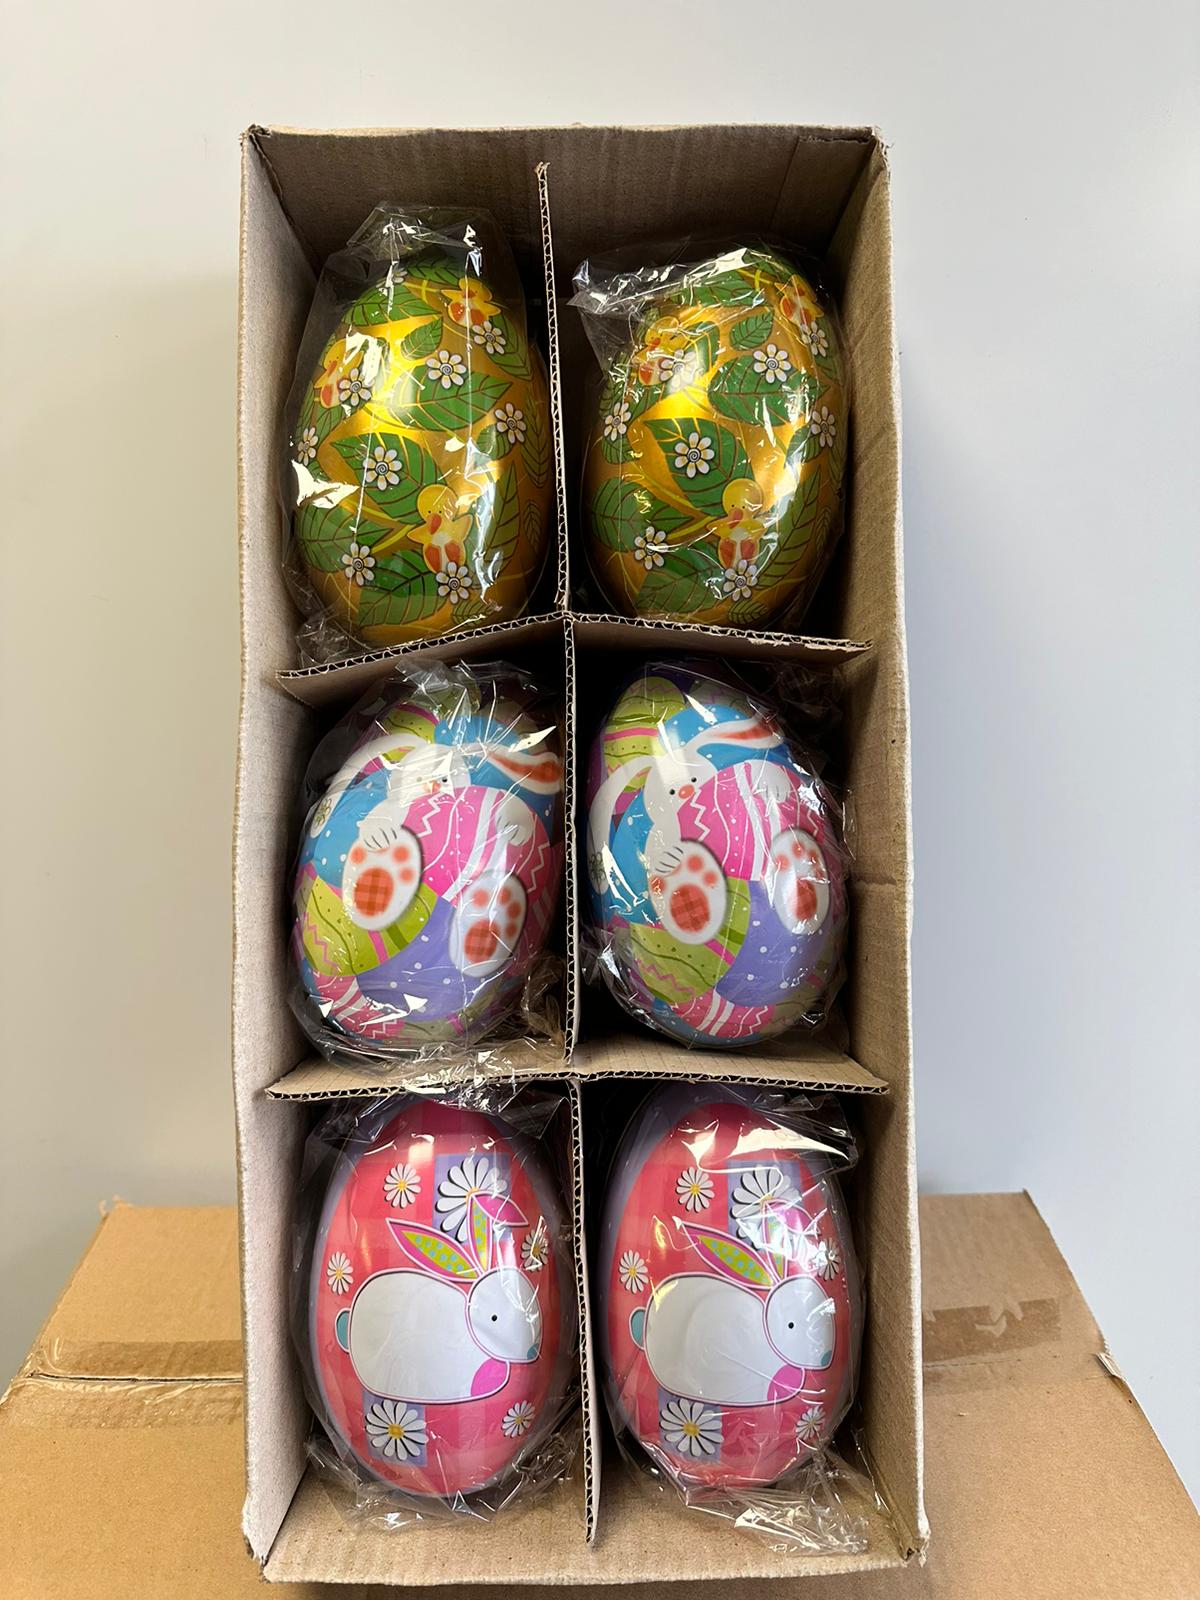 Box of 6 Easter Egg Tins! £10 for 6.  BARGAIN / TO CLEAR